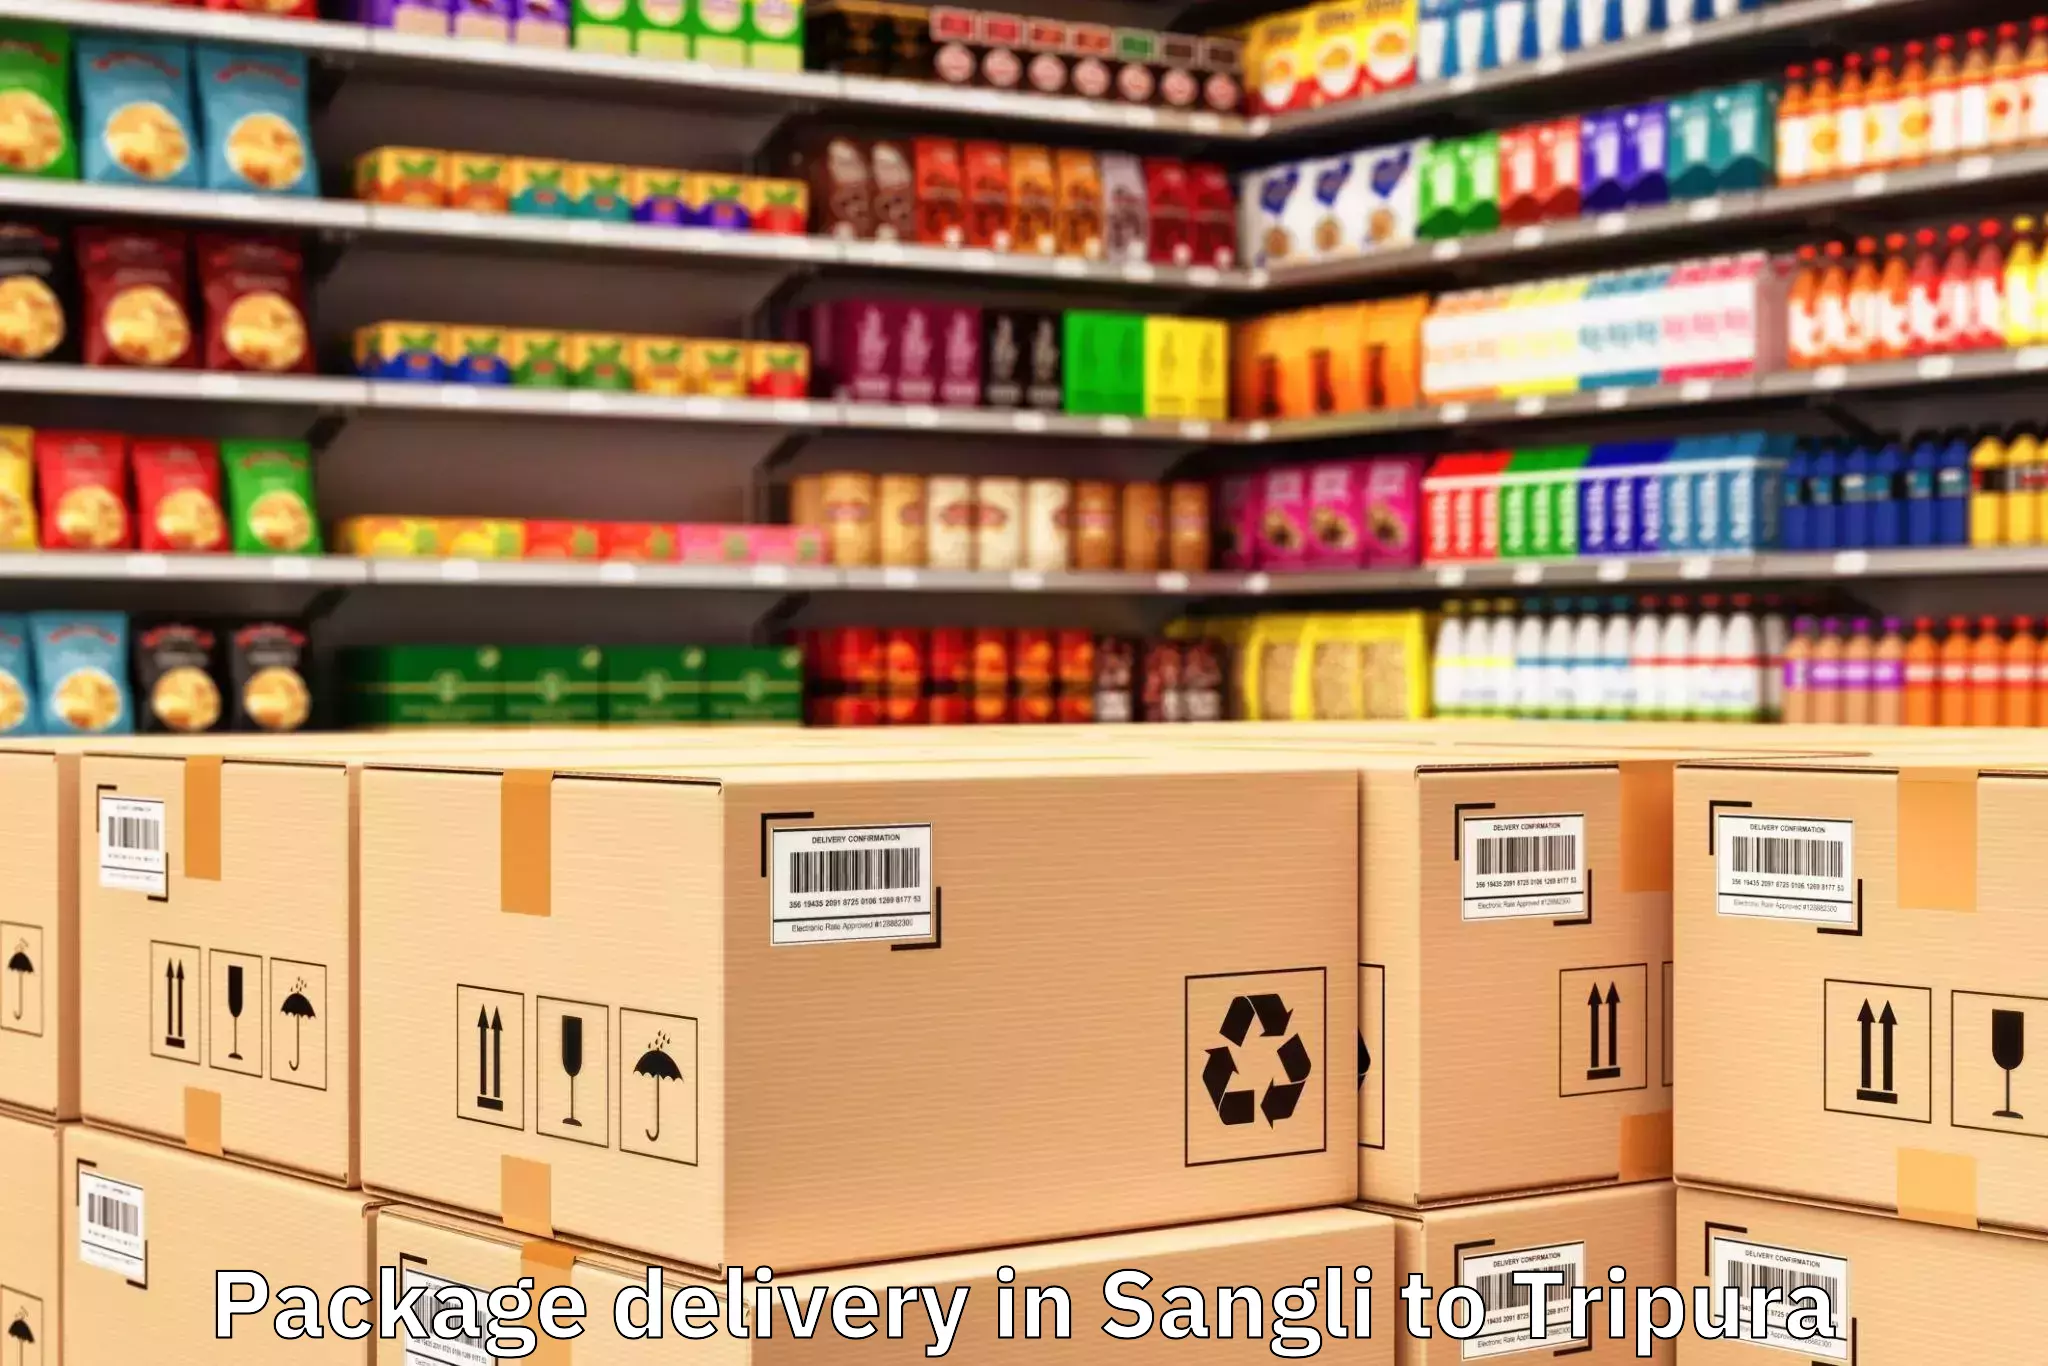 Discover Sangli to Dumburnagar Package Delivery